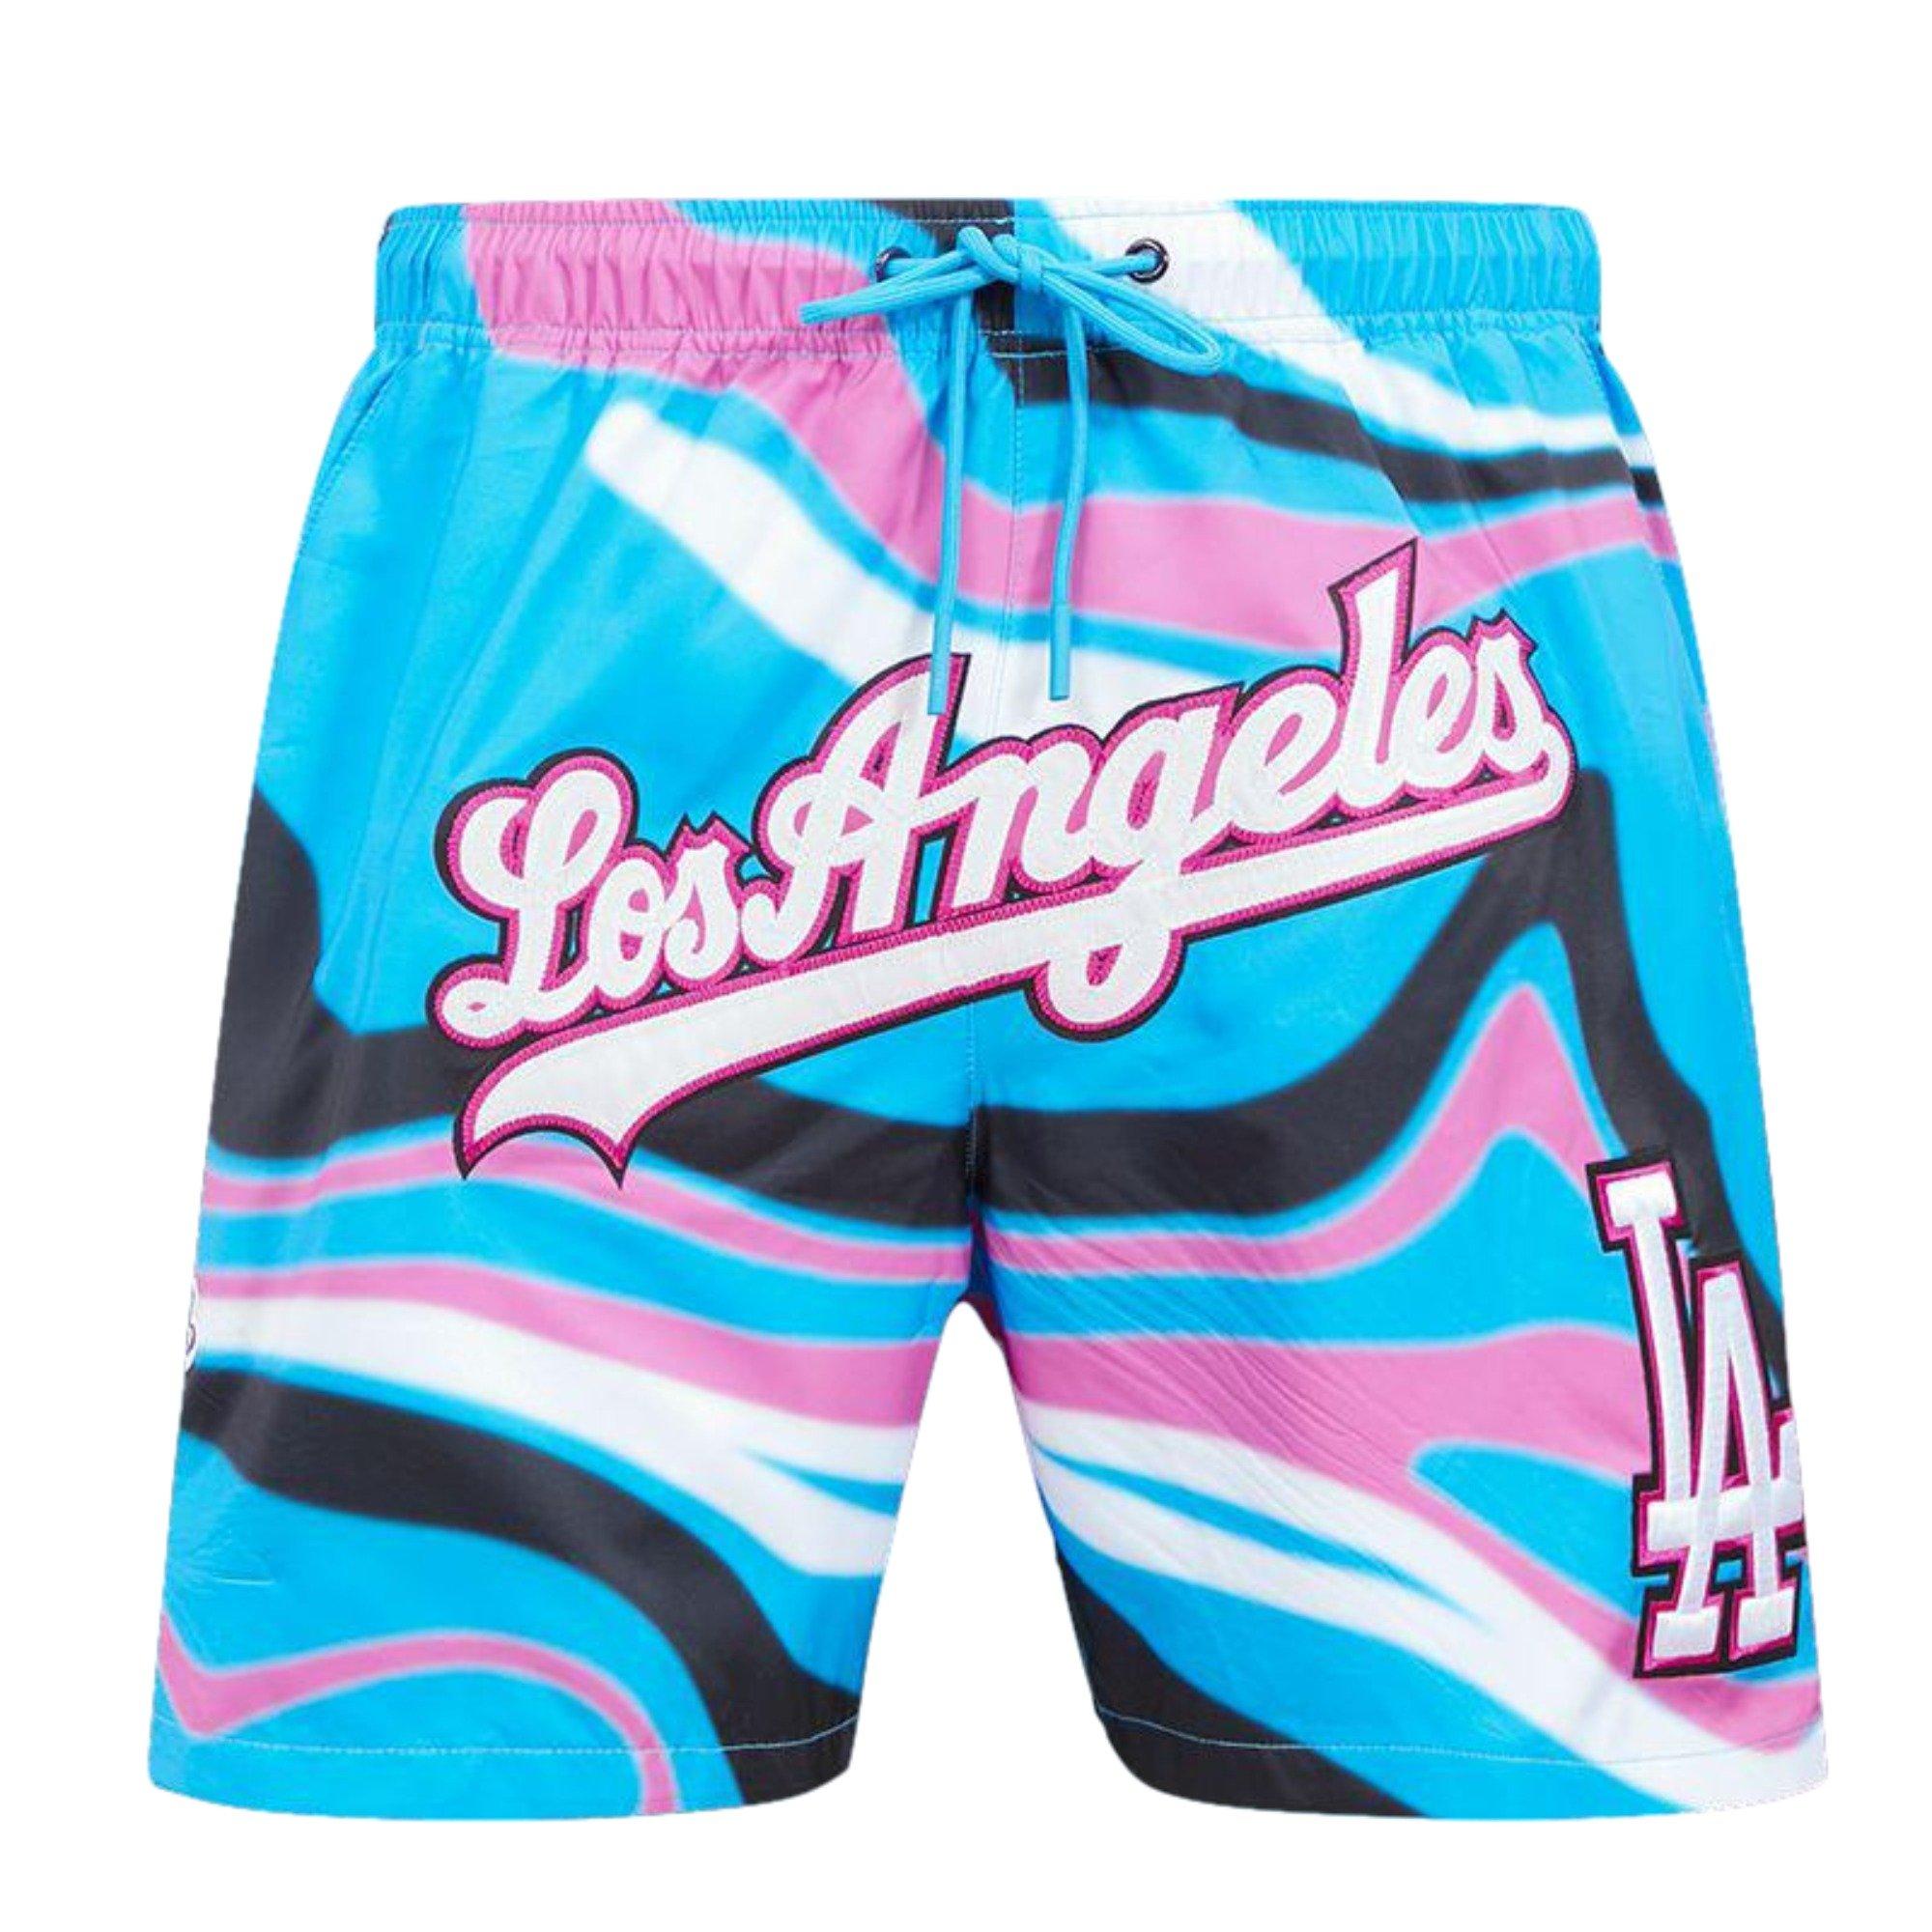 Concepts Sport Los Angeles Dodgers Charcoal Bullseye Shorts, Charcoal, 94% Polyester / 6% SPANDEX, Size 2XL, Rally House